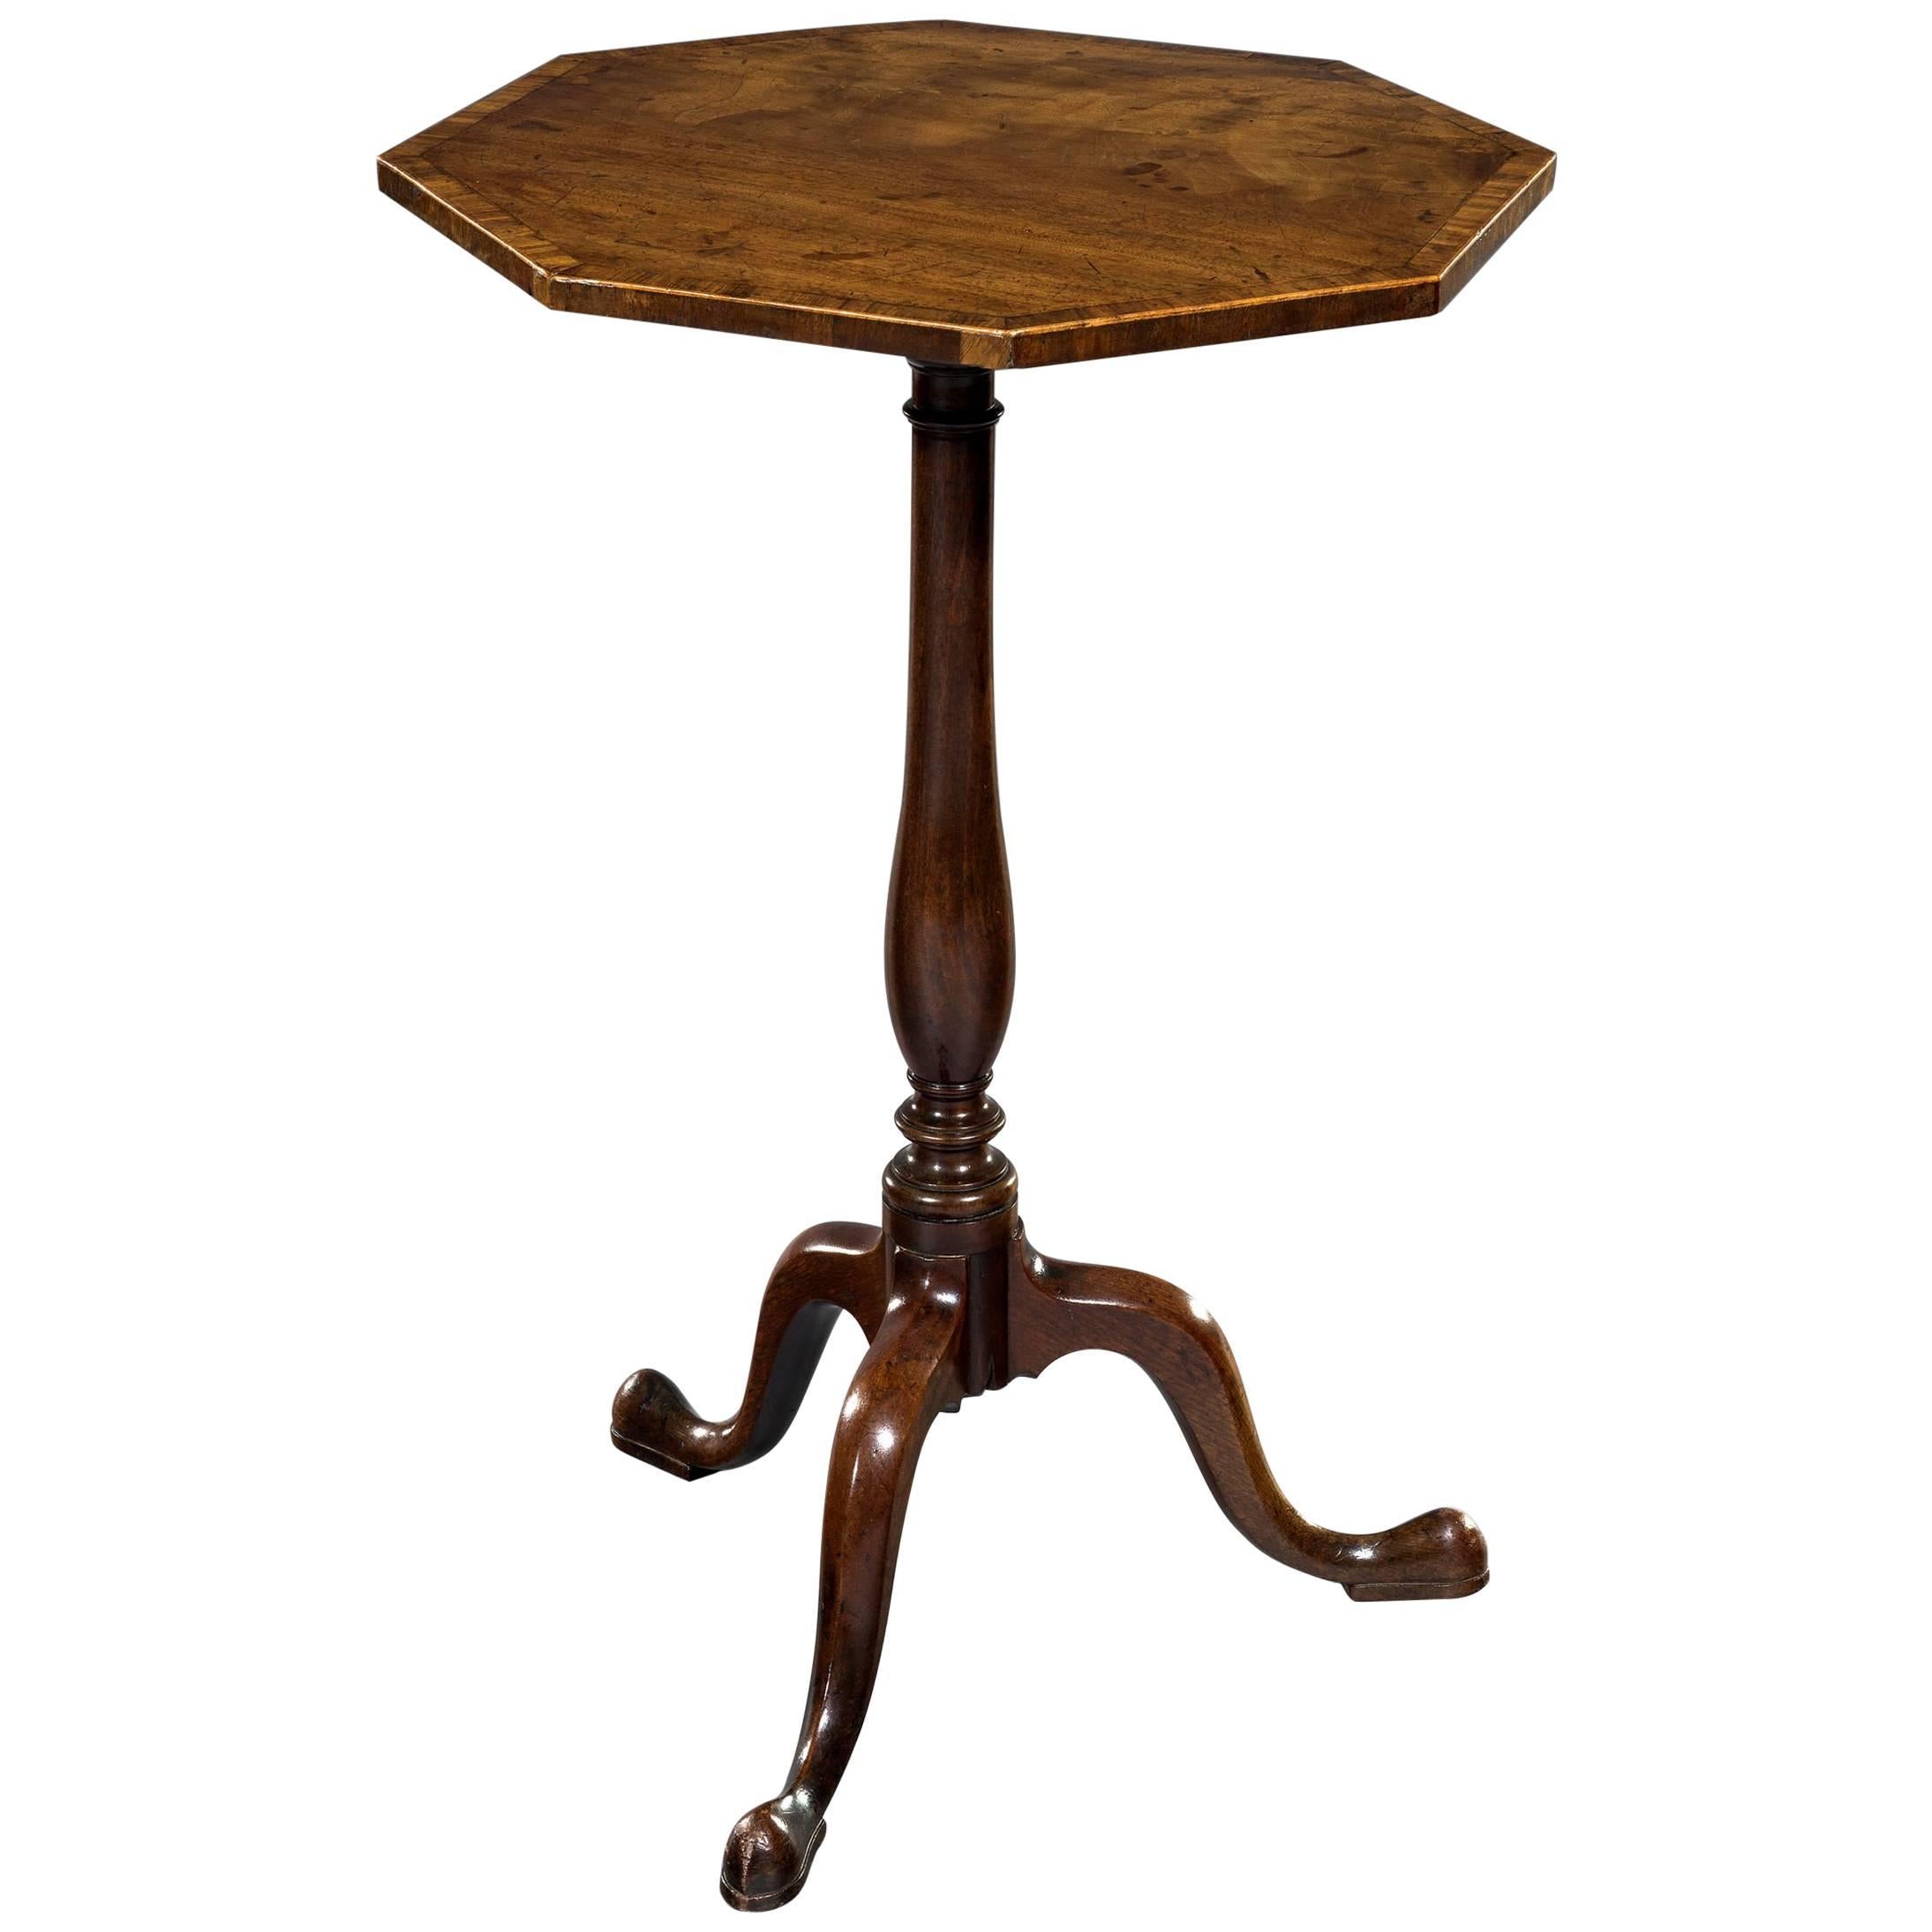 Rare George III 18th Century Period Mahogany Octagonal-Shaped Occasional Table For Sale